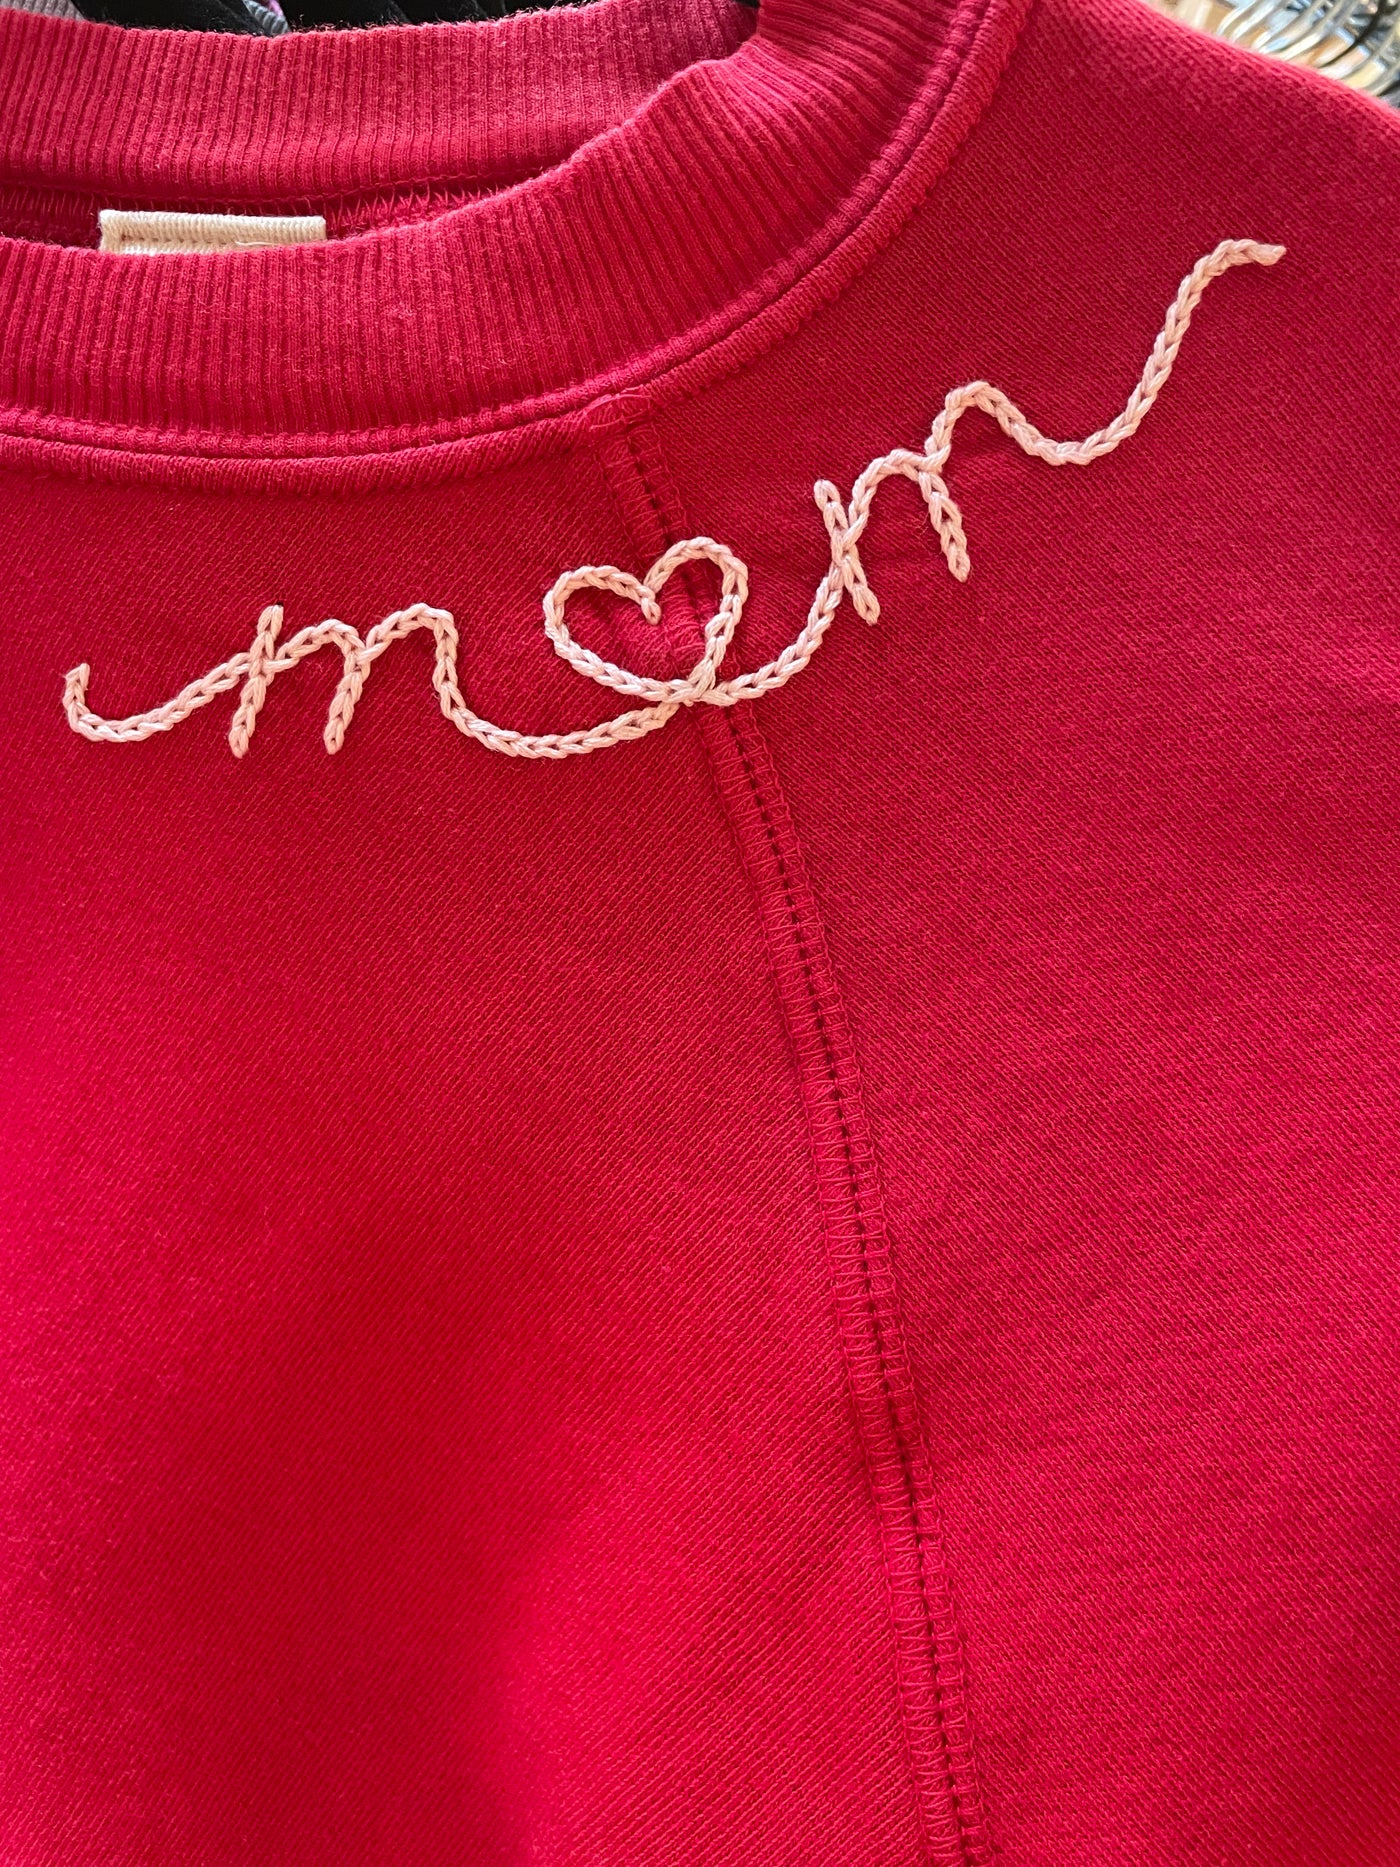 MOM EMBROIDERED CREWNECK IN RED - Romi Boutique